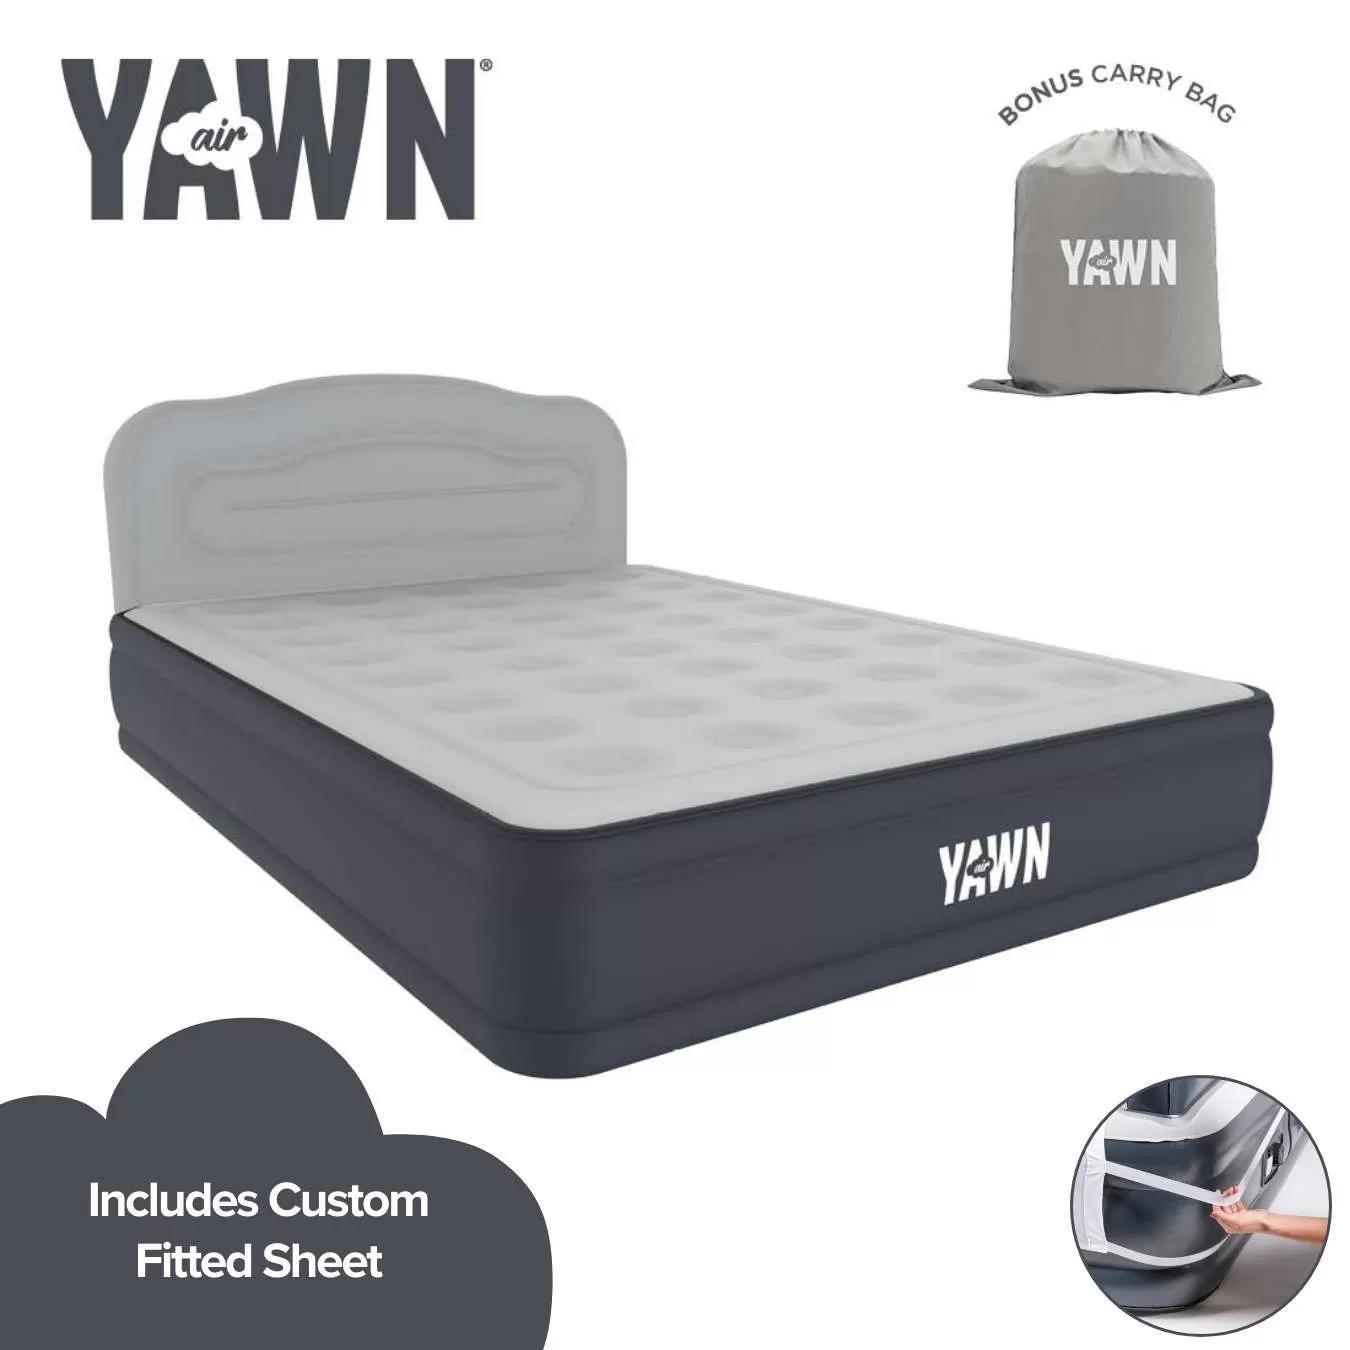 YAWN Air Bed with Custom Fitted Sheet (King)